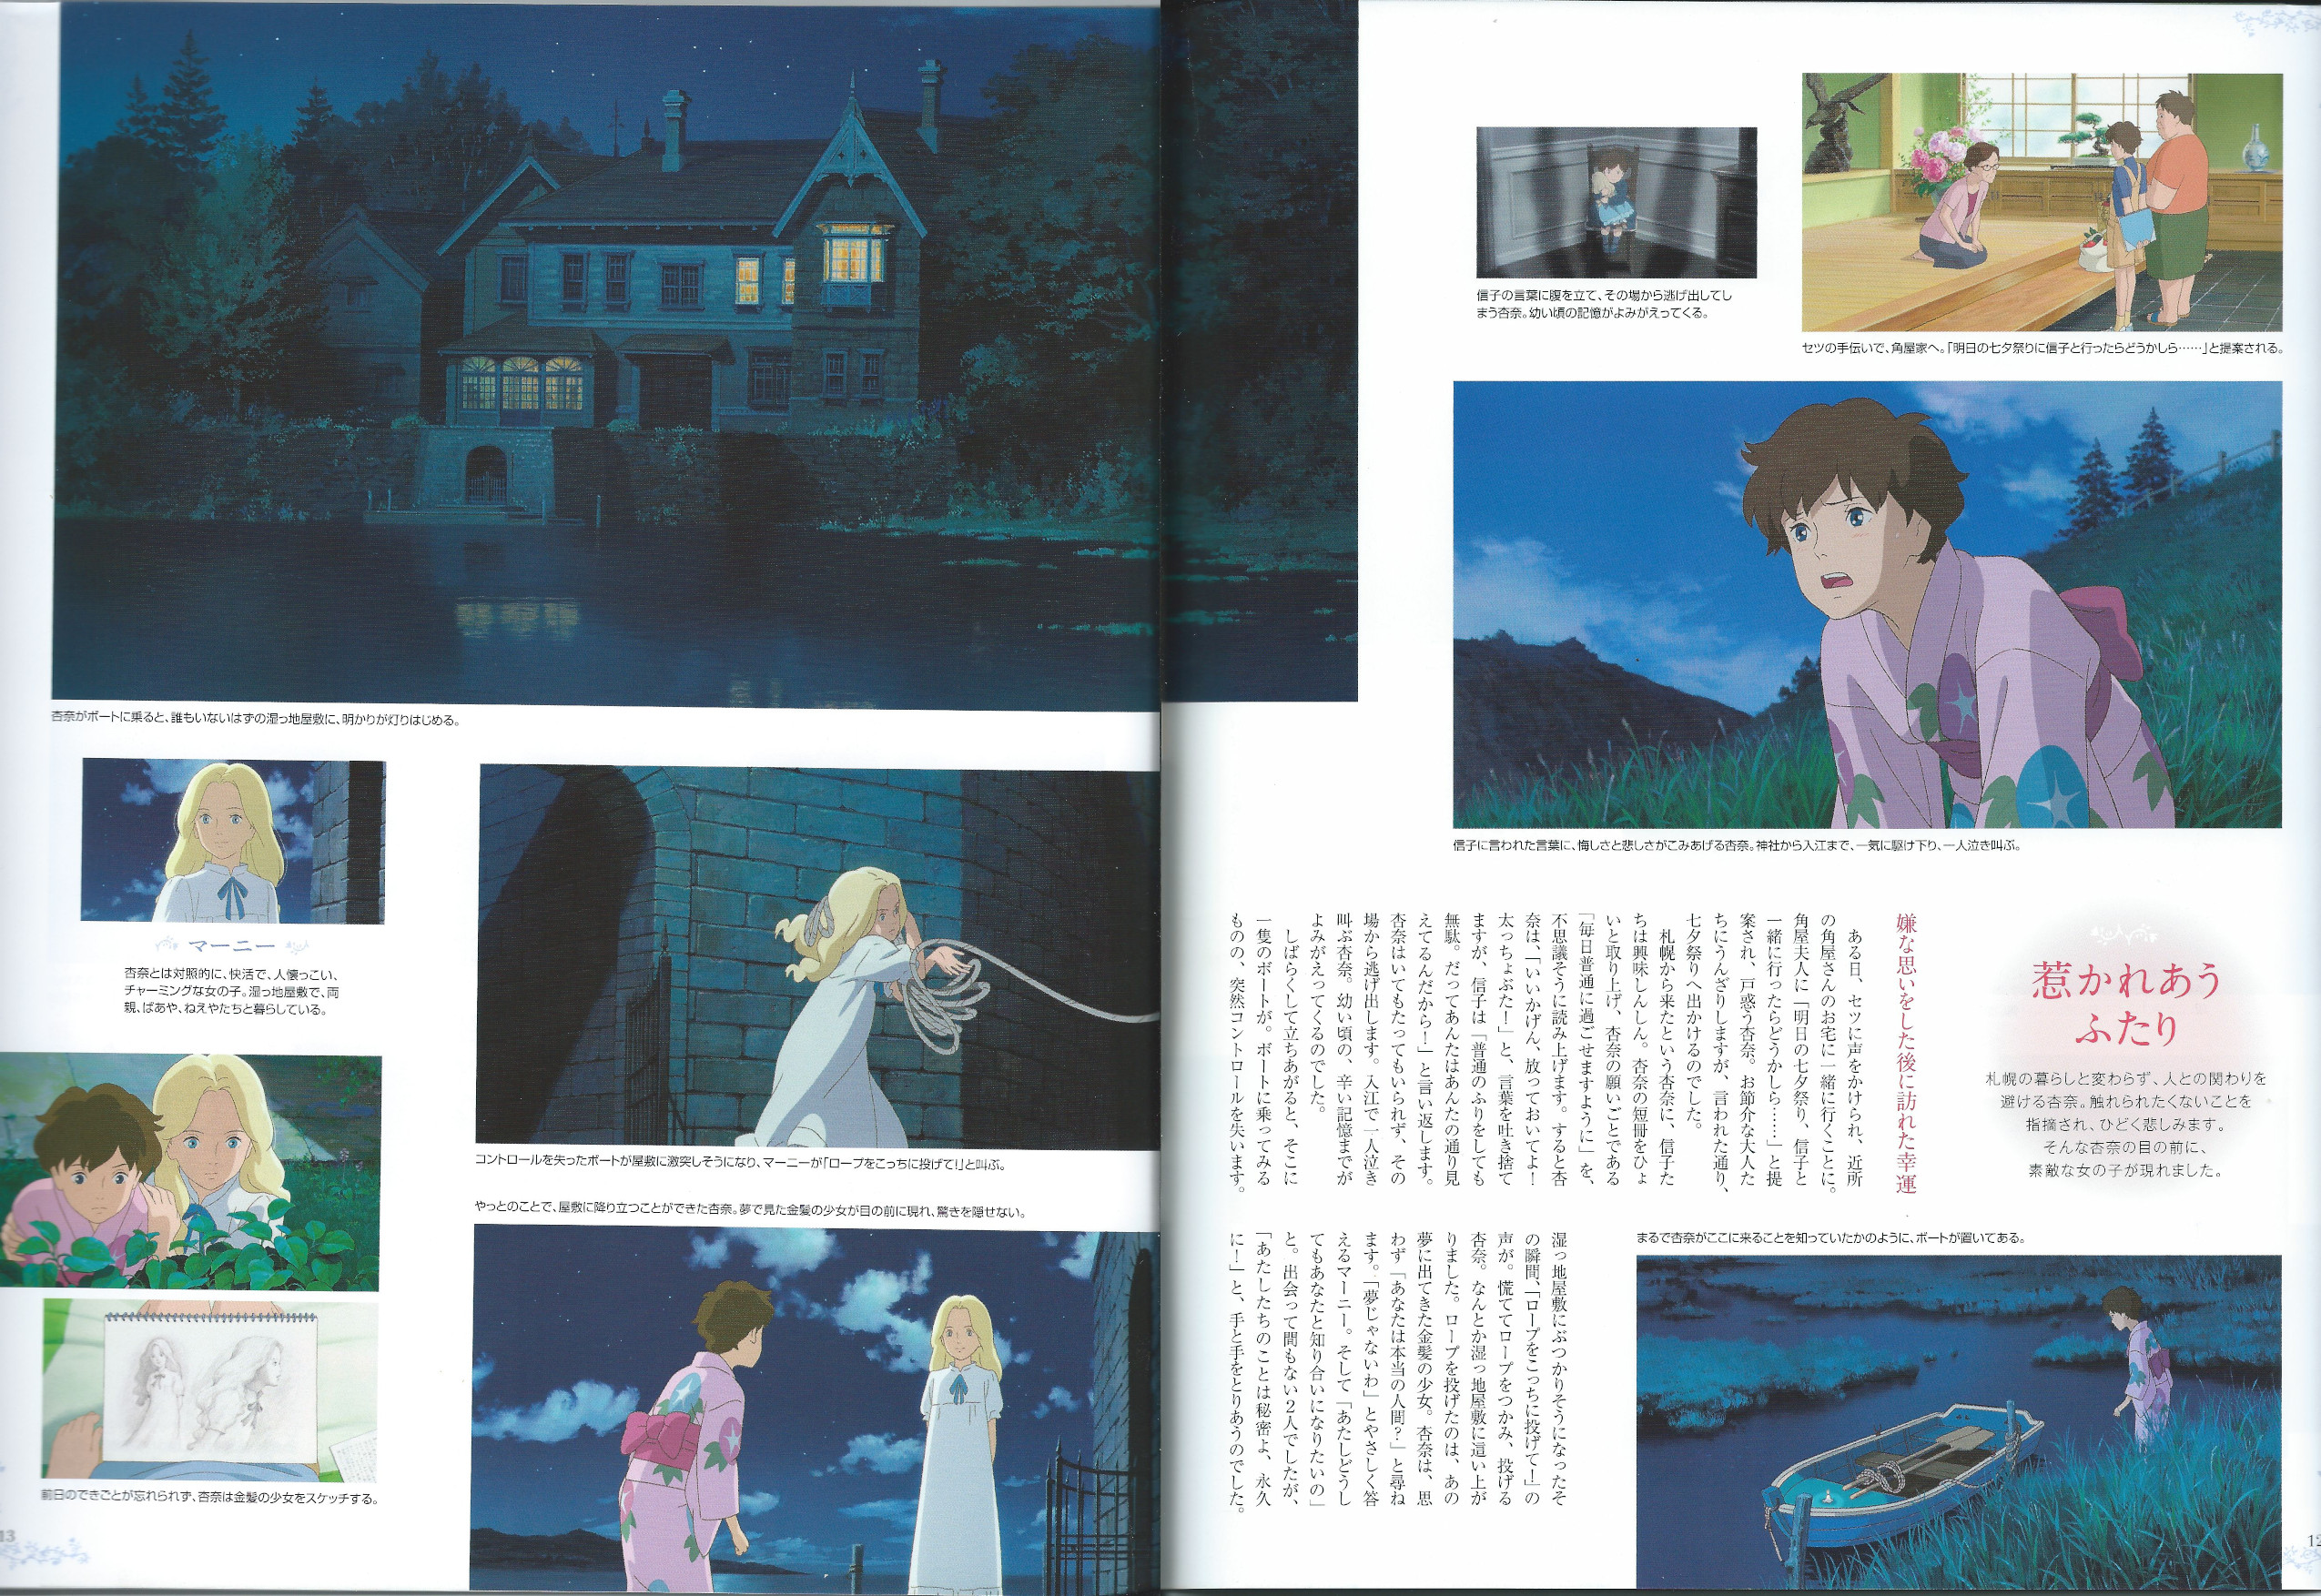 Pages 12 and 13 of the magazine